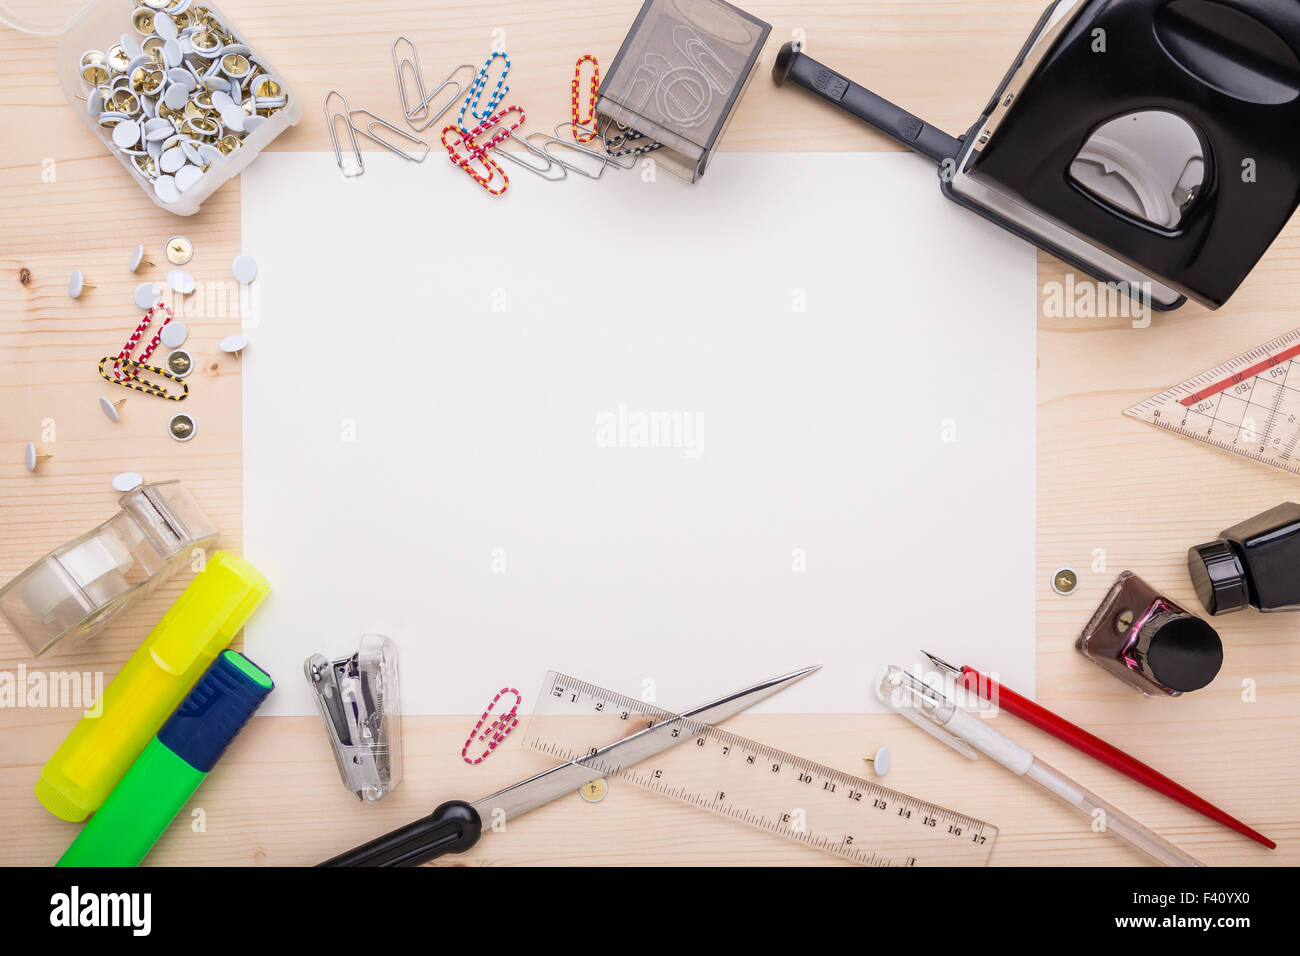 727,696 Office Supplies Images, Stock Photos, 3D objects